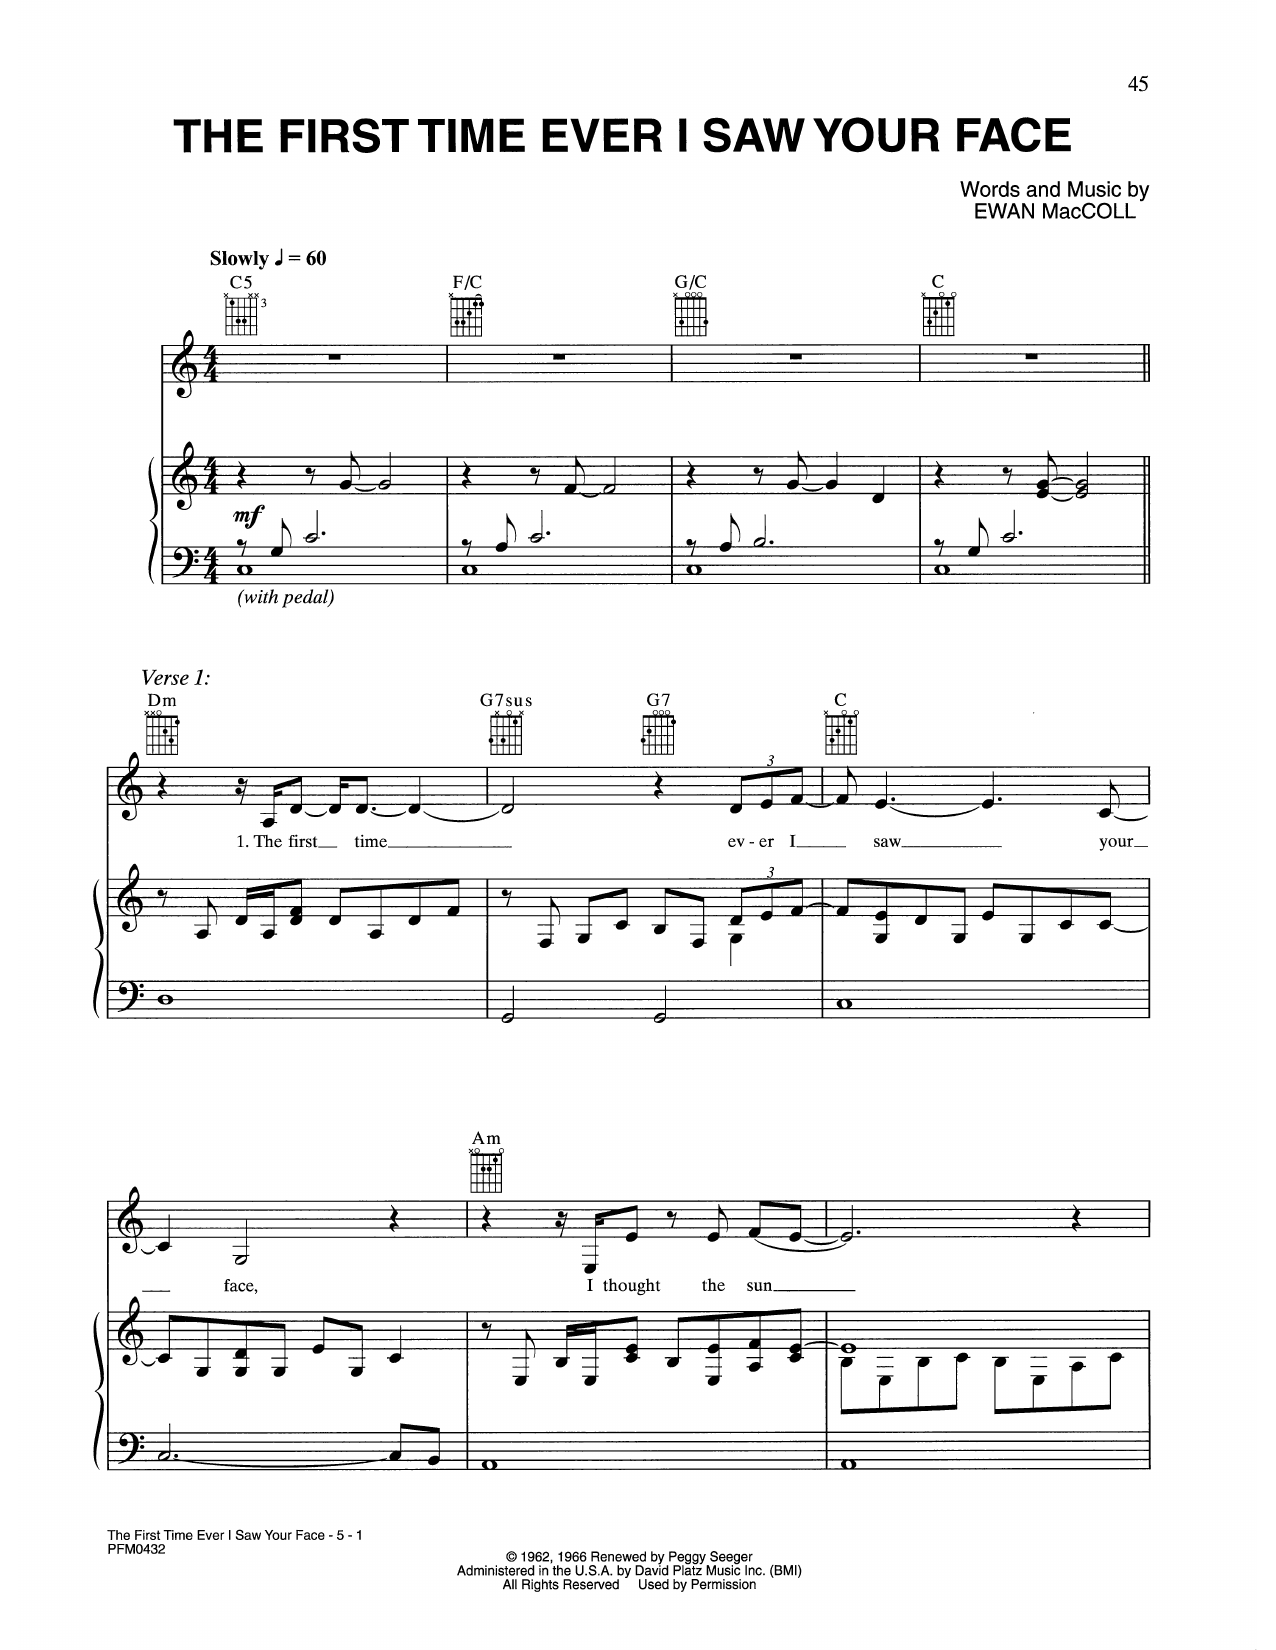 Download Celine Dion The First Time Ever I Saw Your Face Sheet Music